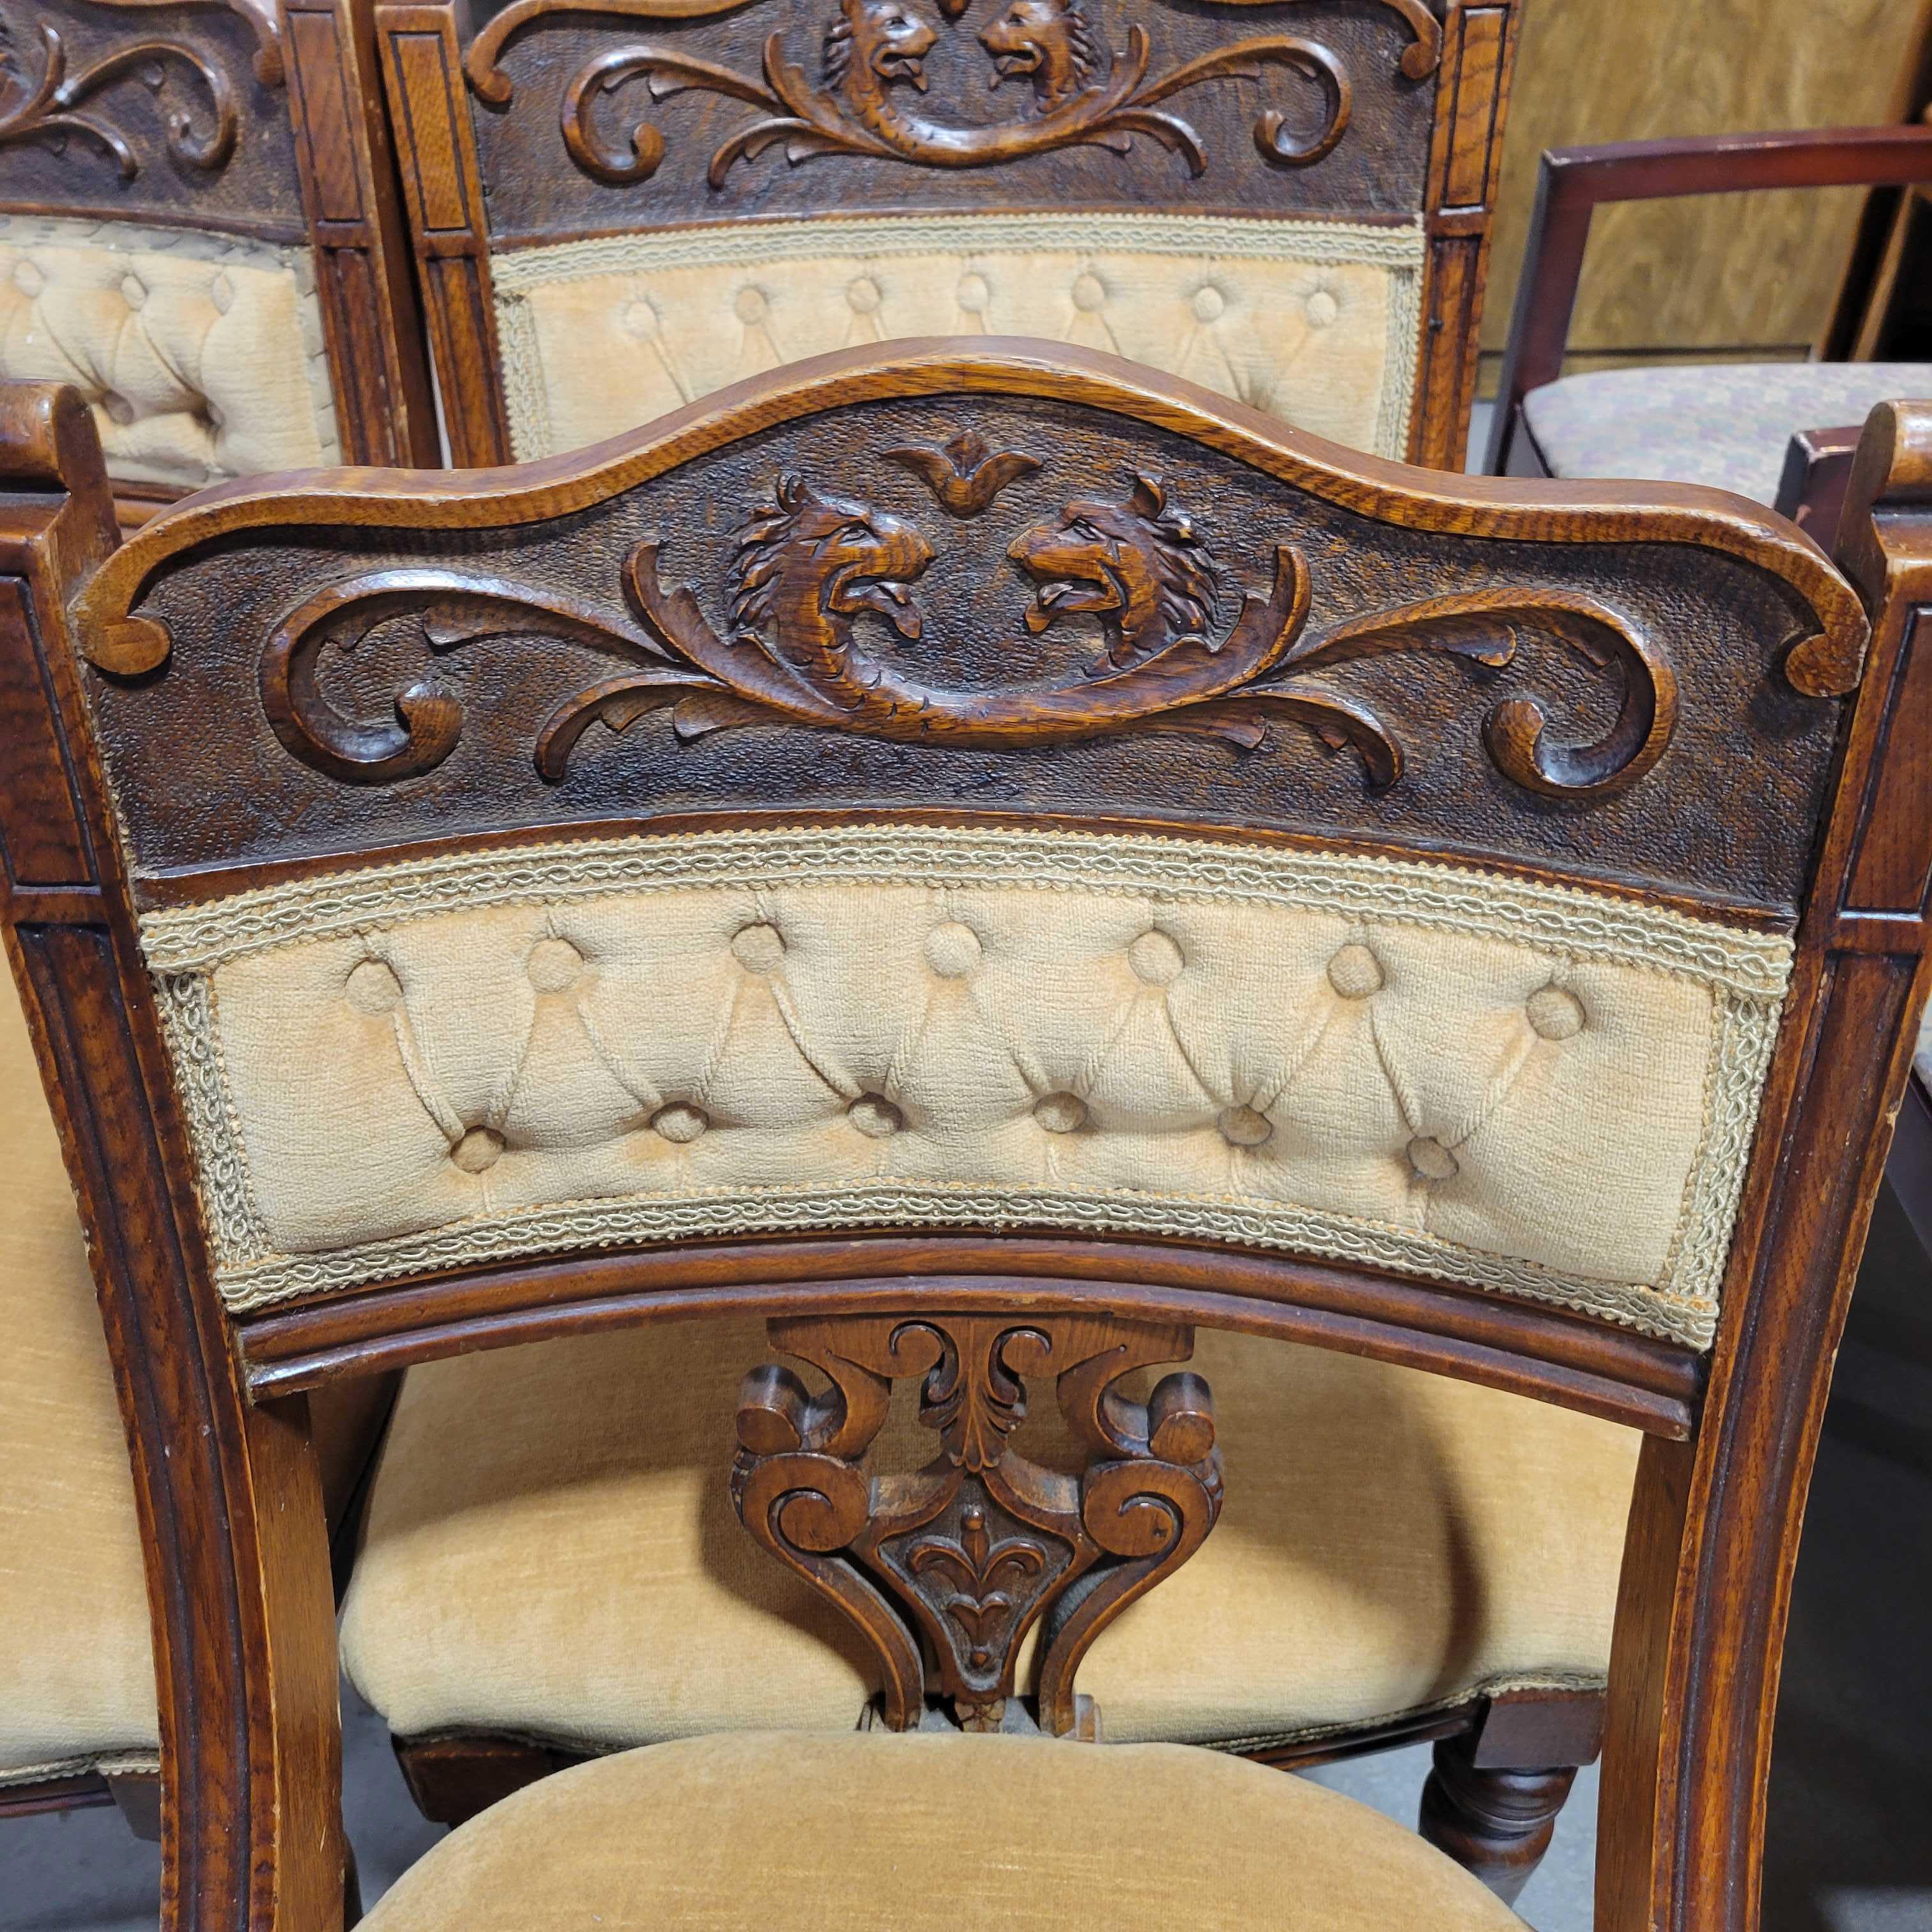 Set of 4 Antique Ornate Carved Wood and Gold Velvet Dining Chairs